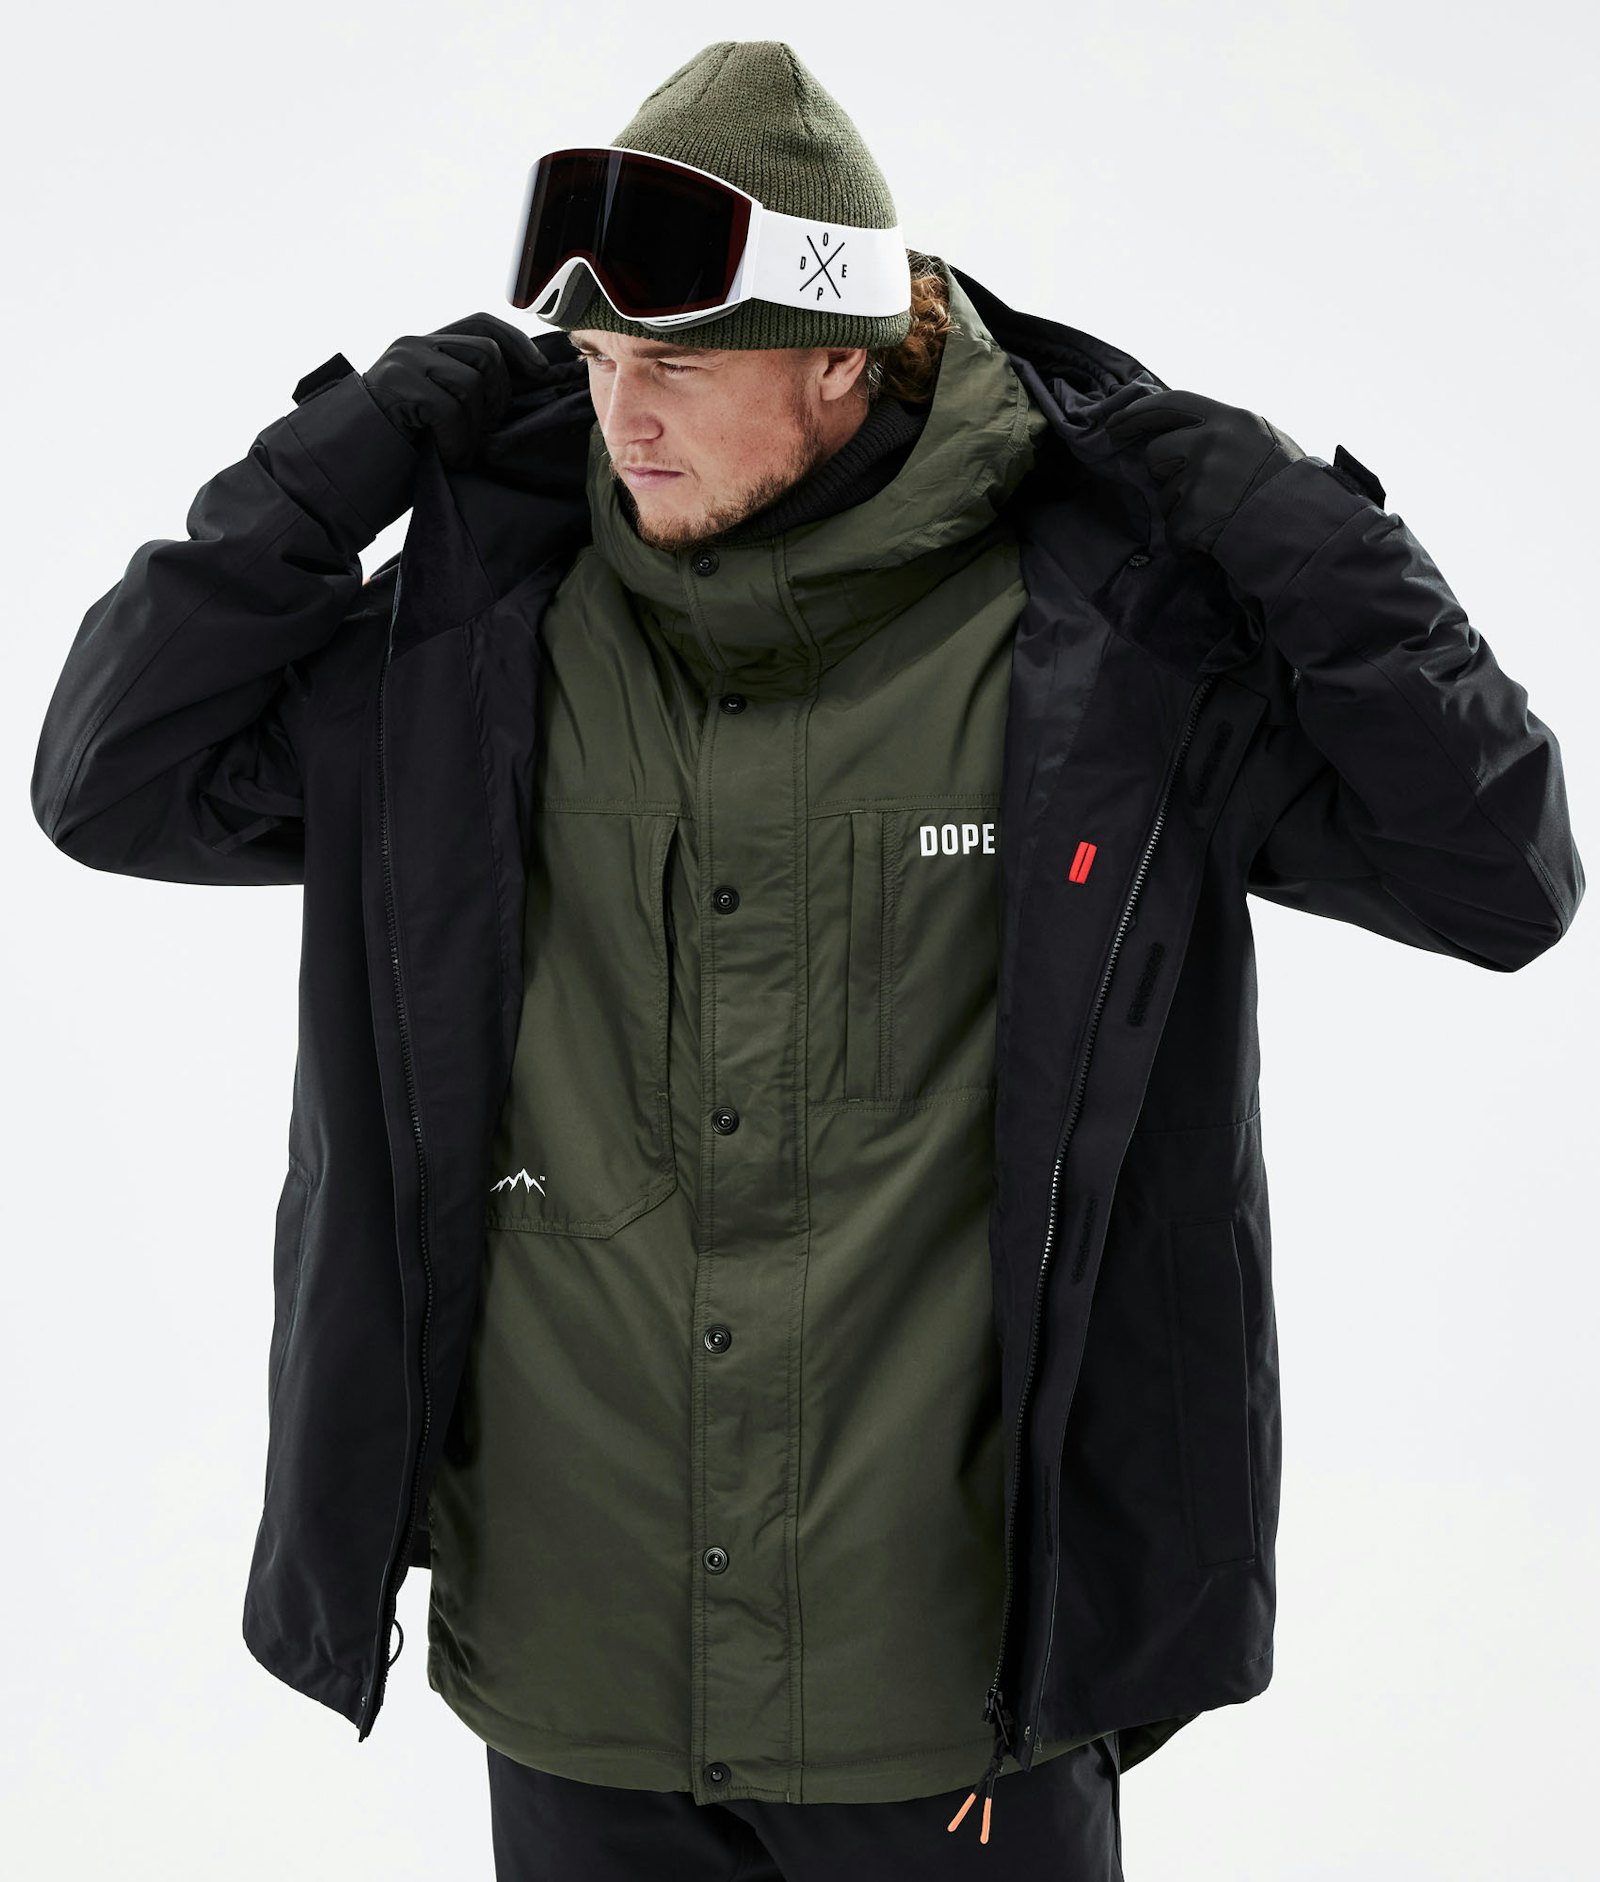 Dope Insulated Giacca Midlayer Sci Uomo Olive Green